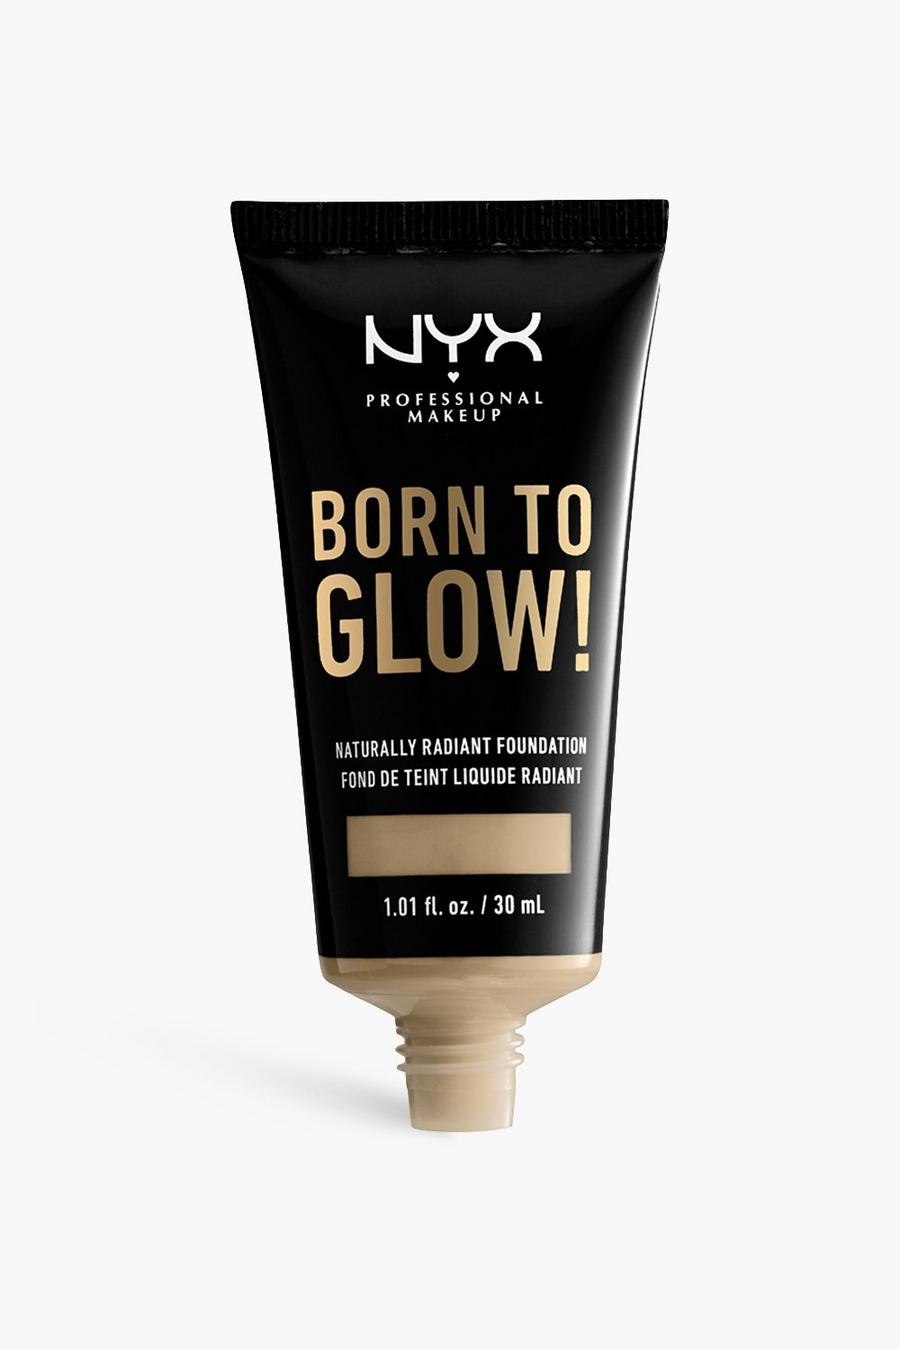 10 buff NYX Professional Makeup Born To Glow! Naturally Radiant Foundation